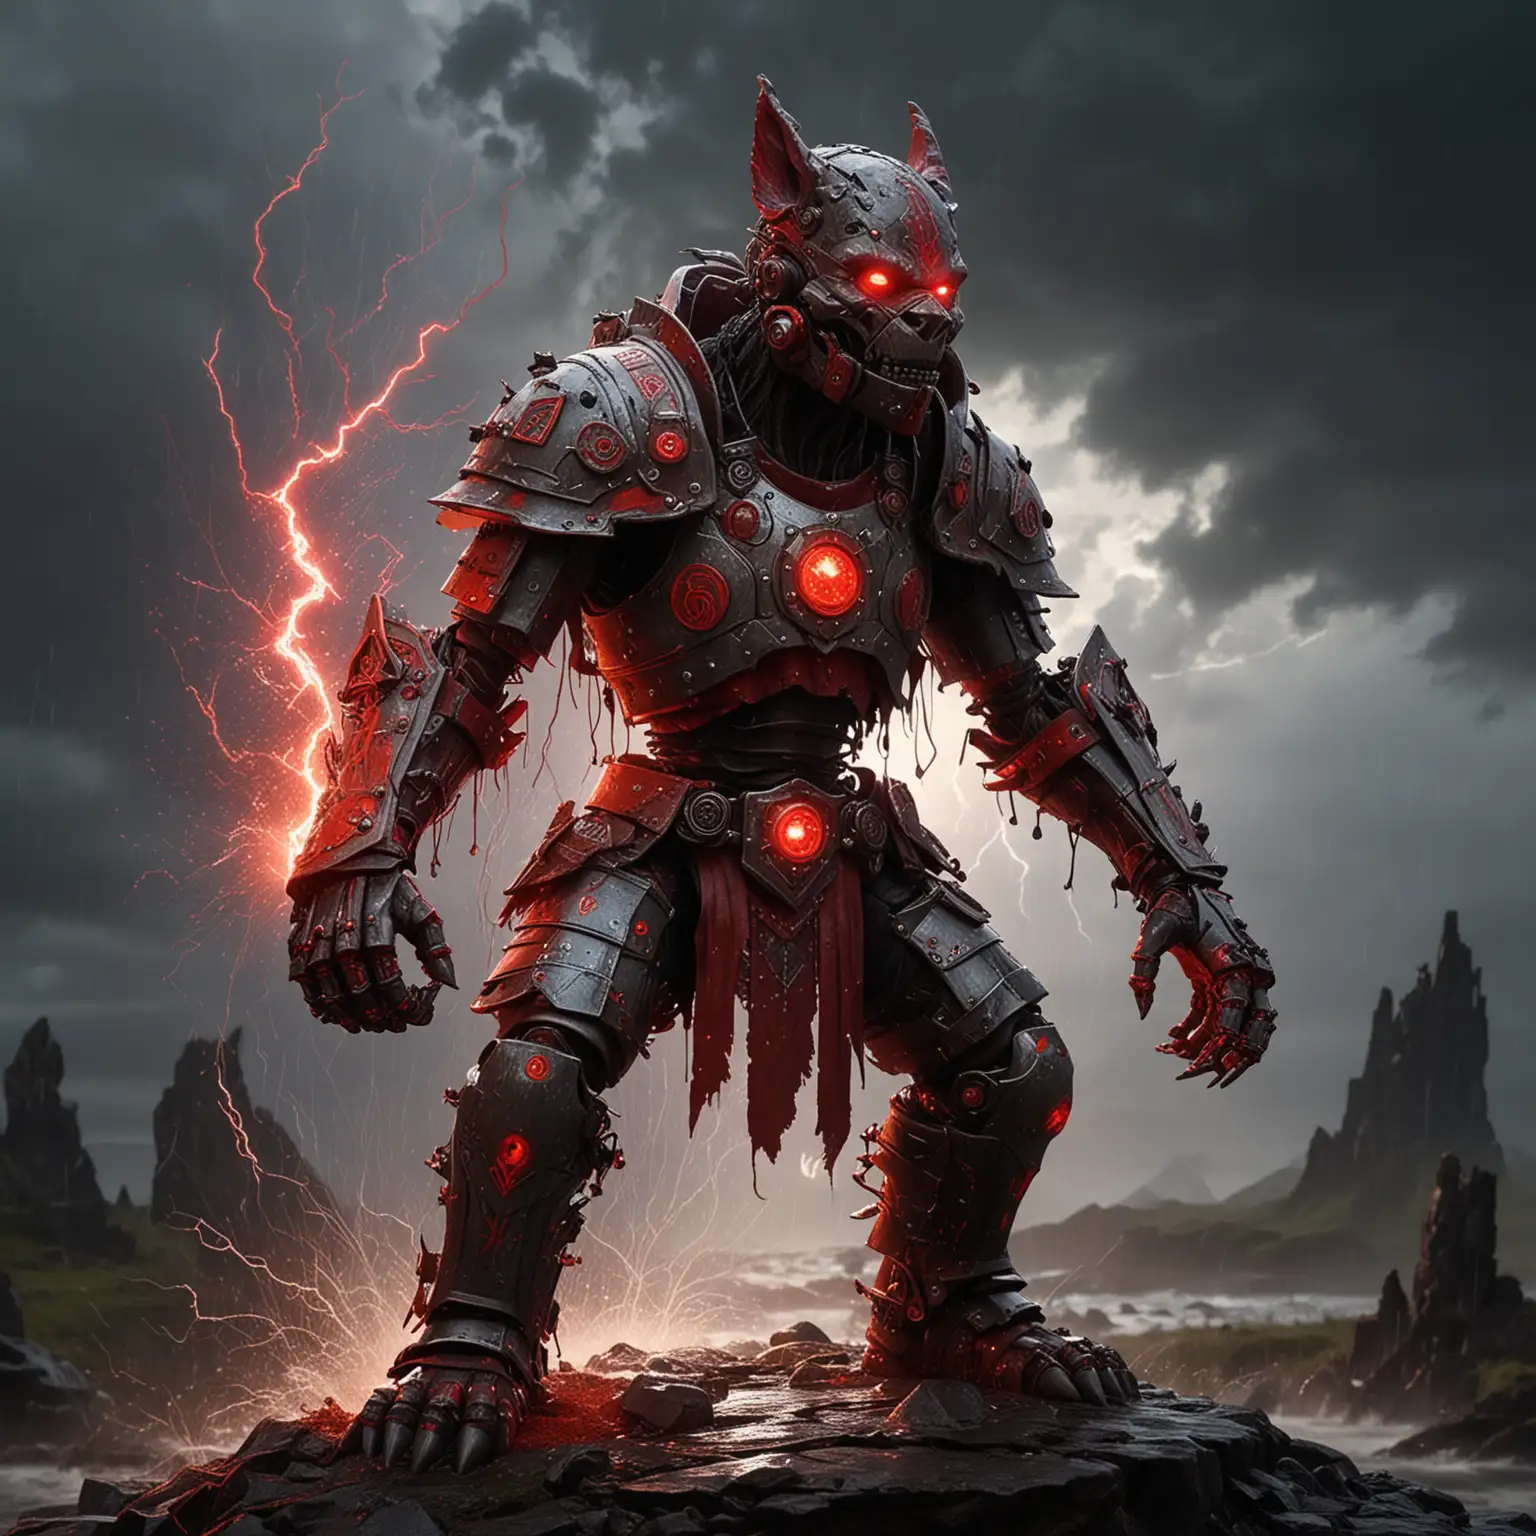 a robot werewolf-gnome cyborg, wearing ancient plate armor painted with glowing crimson red arcane glyphs and runes, powered and fueled by rivulets of blood magic, with gauntlets that crackle with lightning bolt energy.

He is silhouetted by the morning dawn on a stormy day